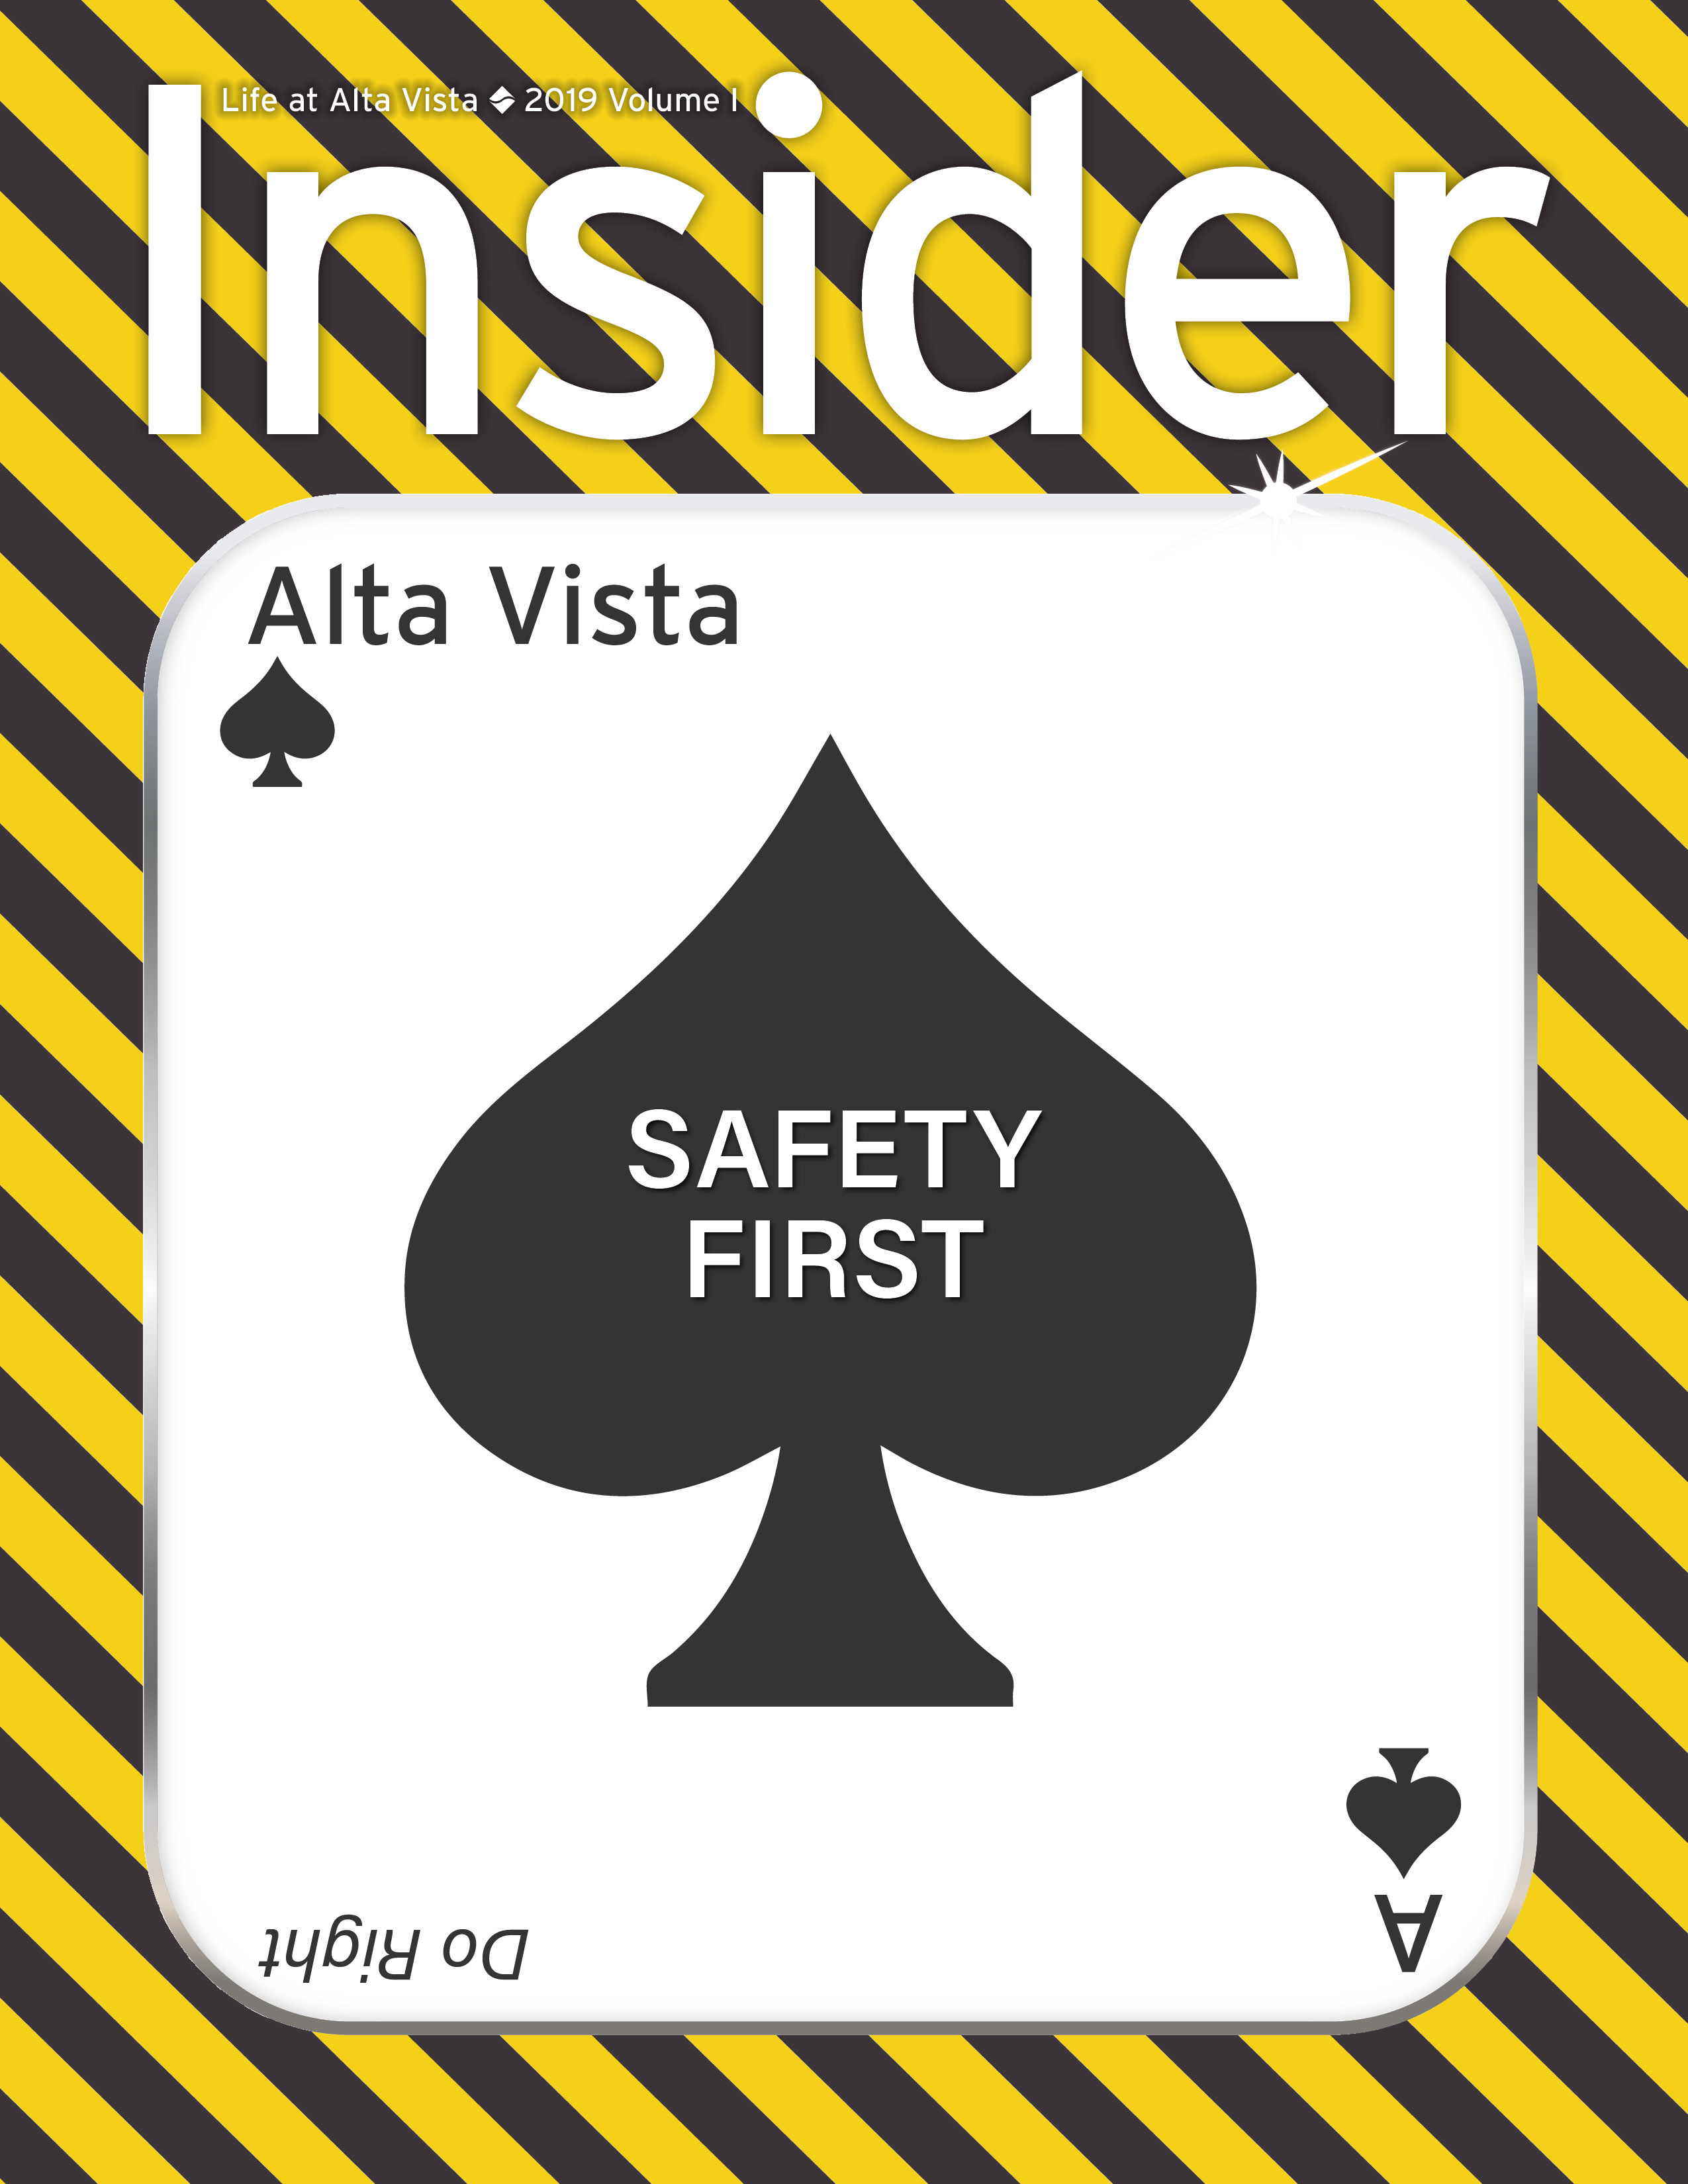 Insider 2019 Volume 1 edition: Safety (Click to view this issue)